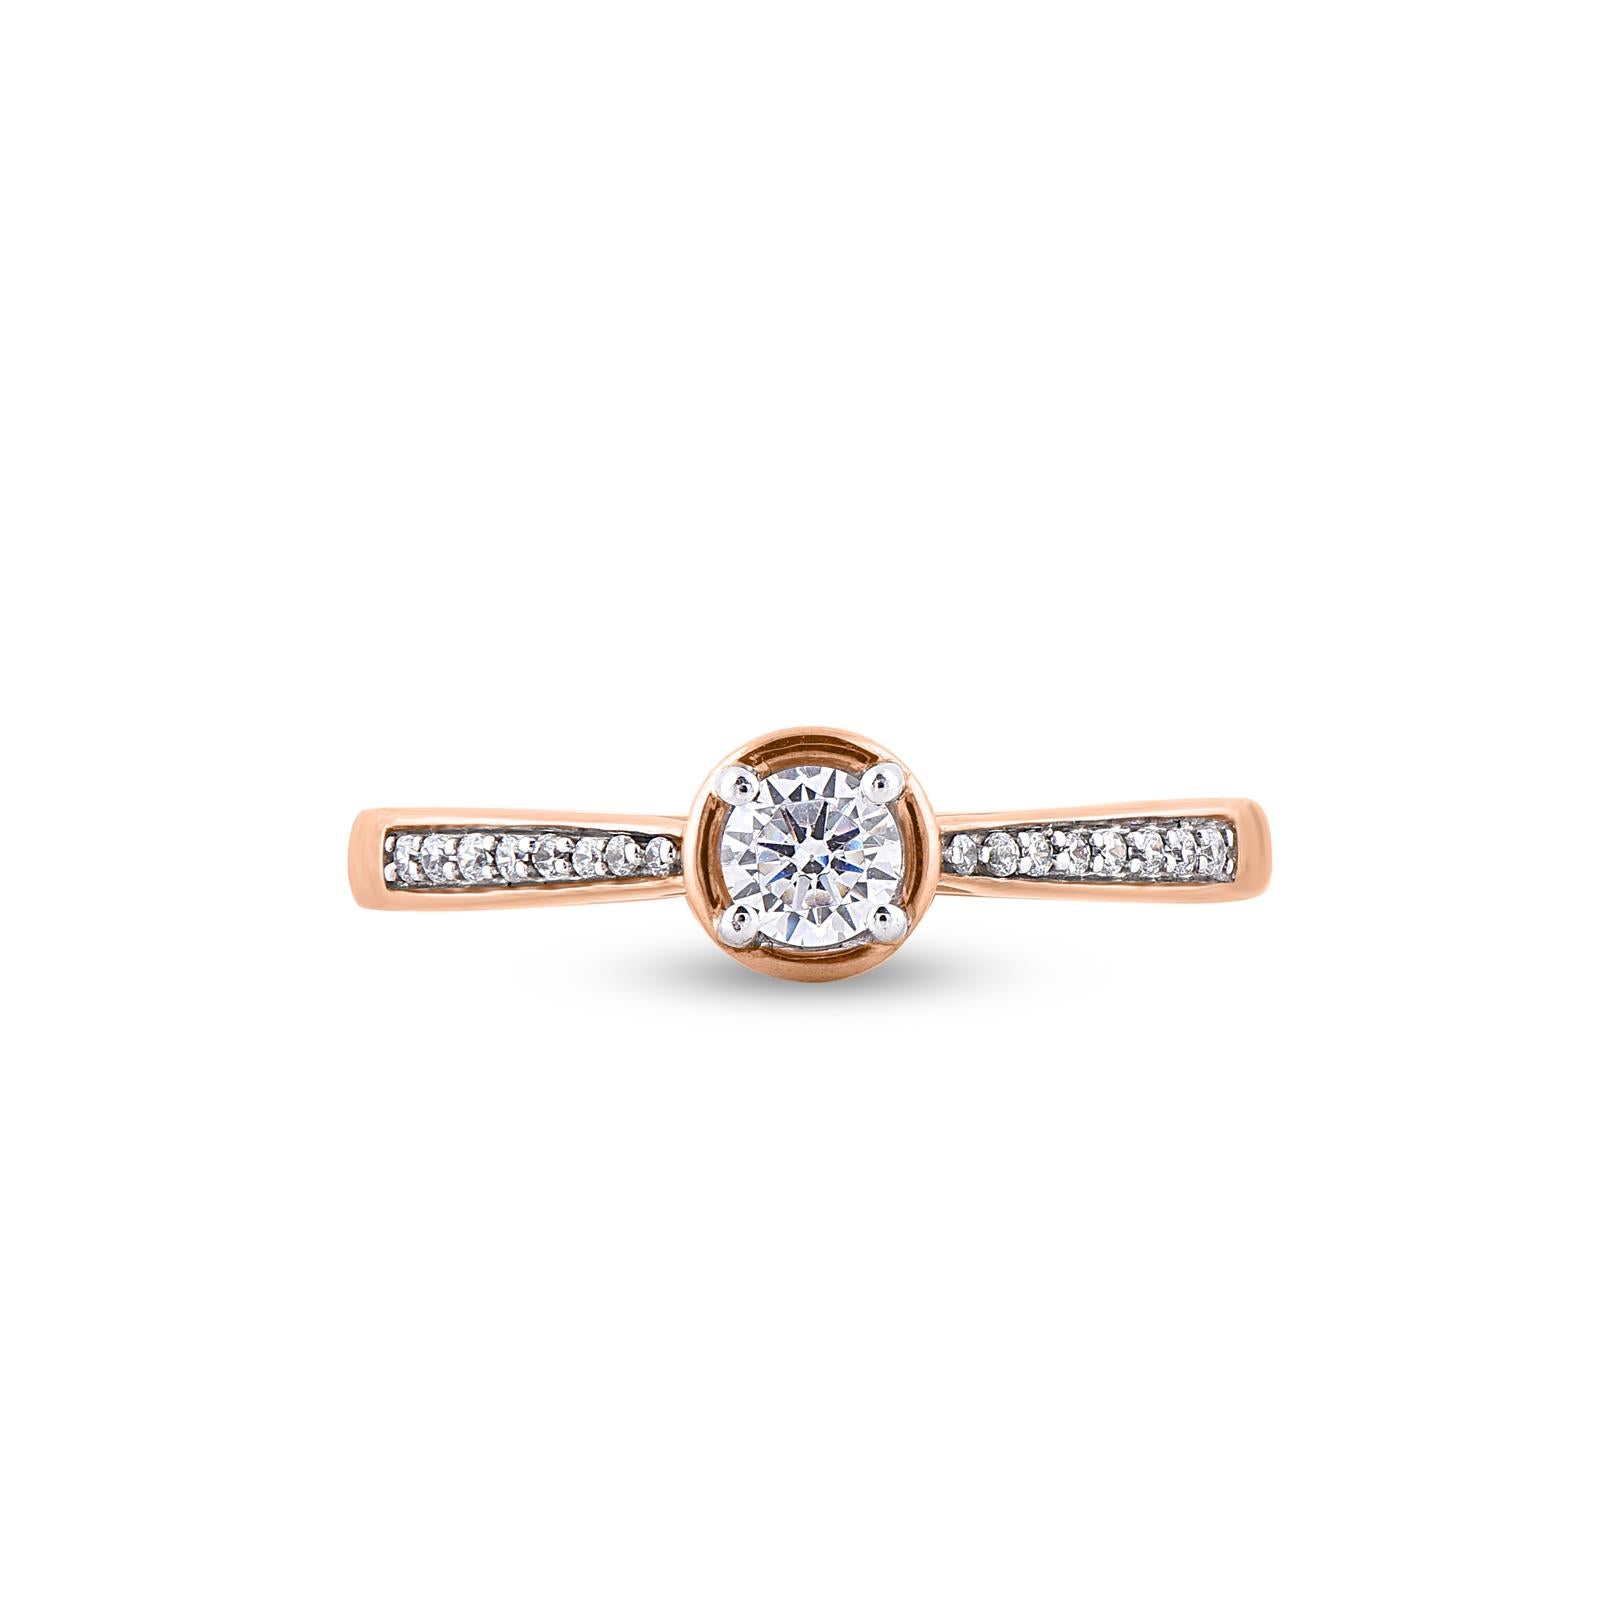 A sweet symbol of your everlasting romance, expertly crafted in 14 Karat rose gold and shines with 17 brilliant cut and single cut diamond in prong and pave setting. The total weight of diamonds 0.33 carat, H-I color and I2 Clarity. This ring has